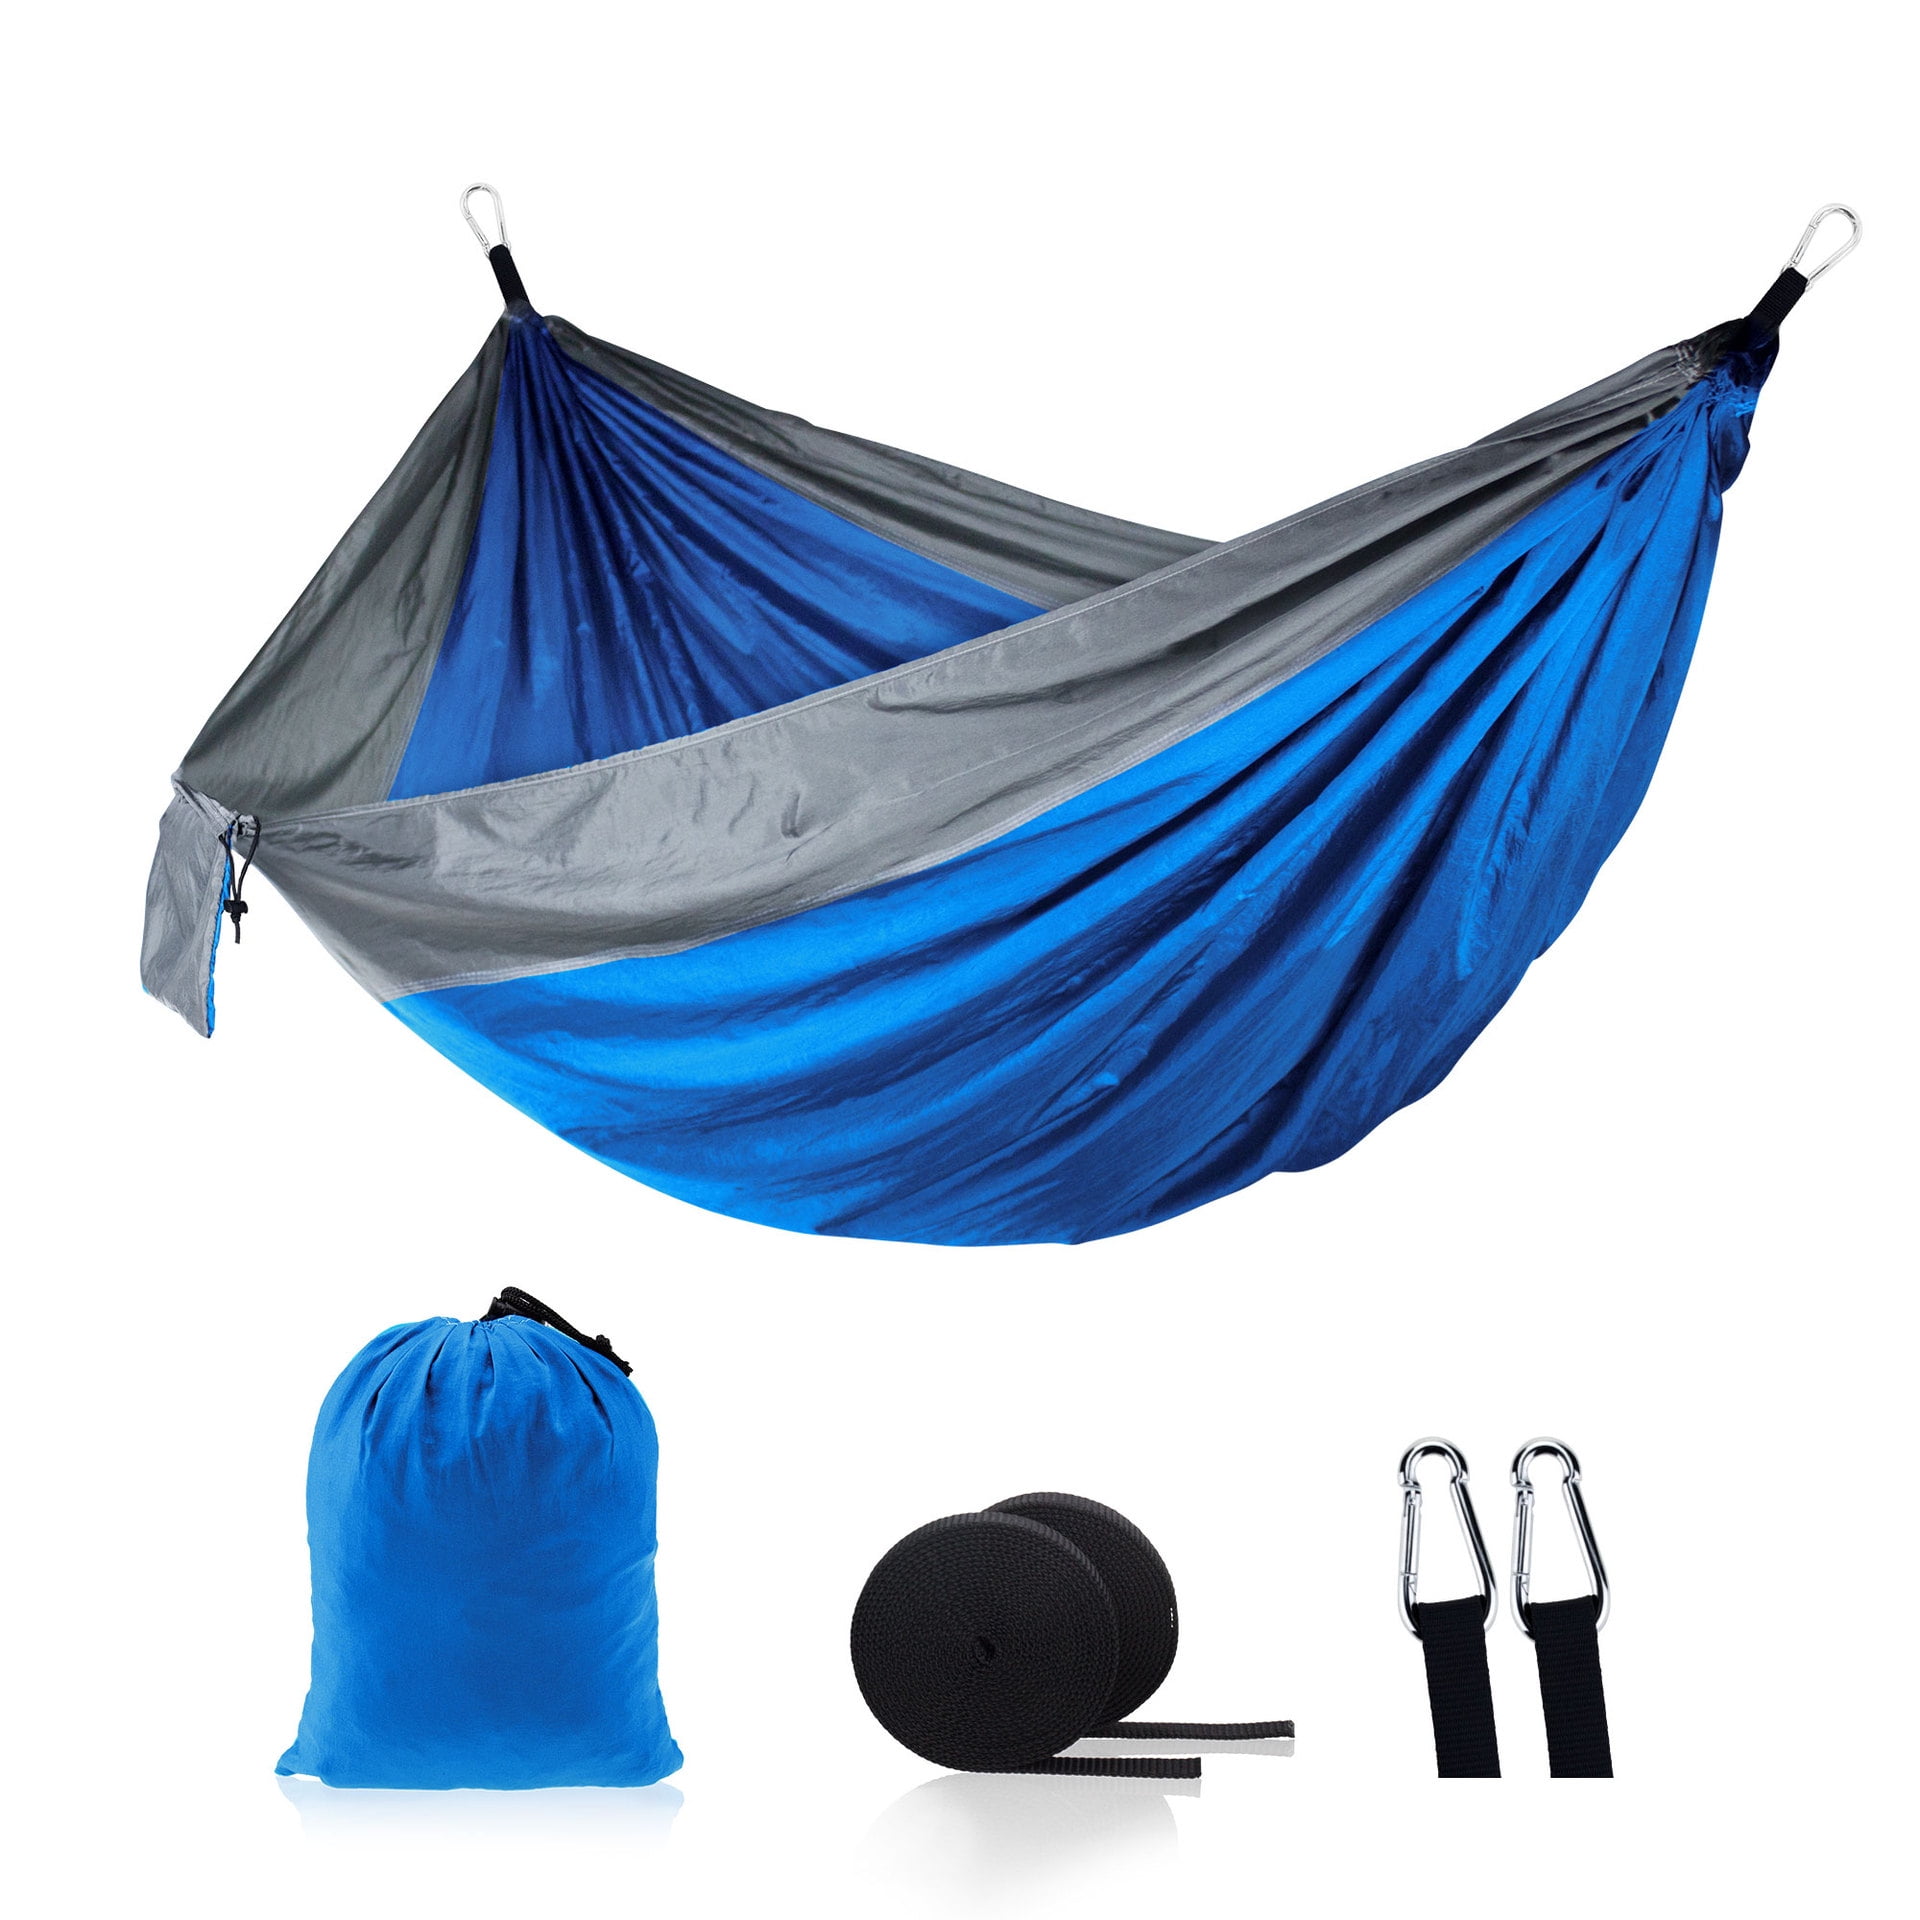 Portable Double Person Camping Hammock Nylon Travel Outdoor Sleeping Swing Bed